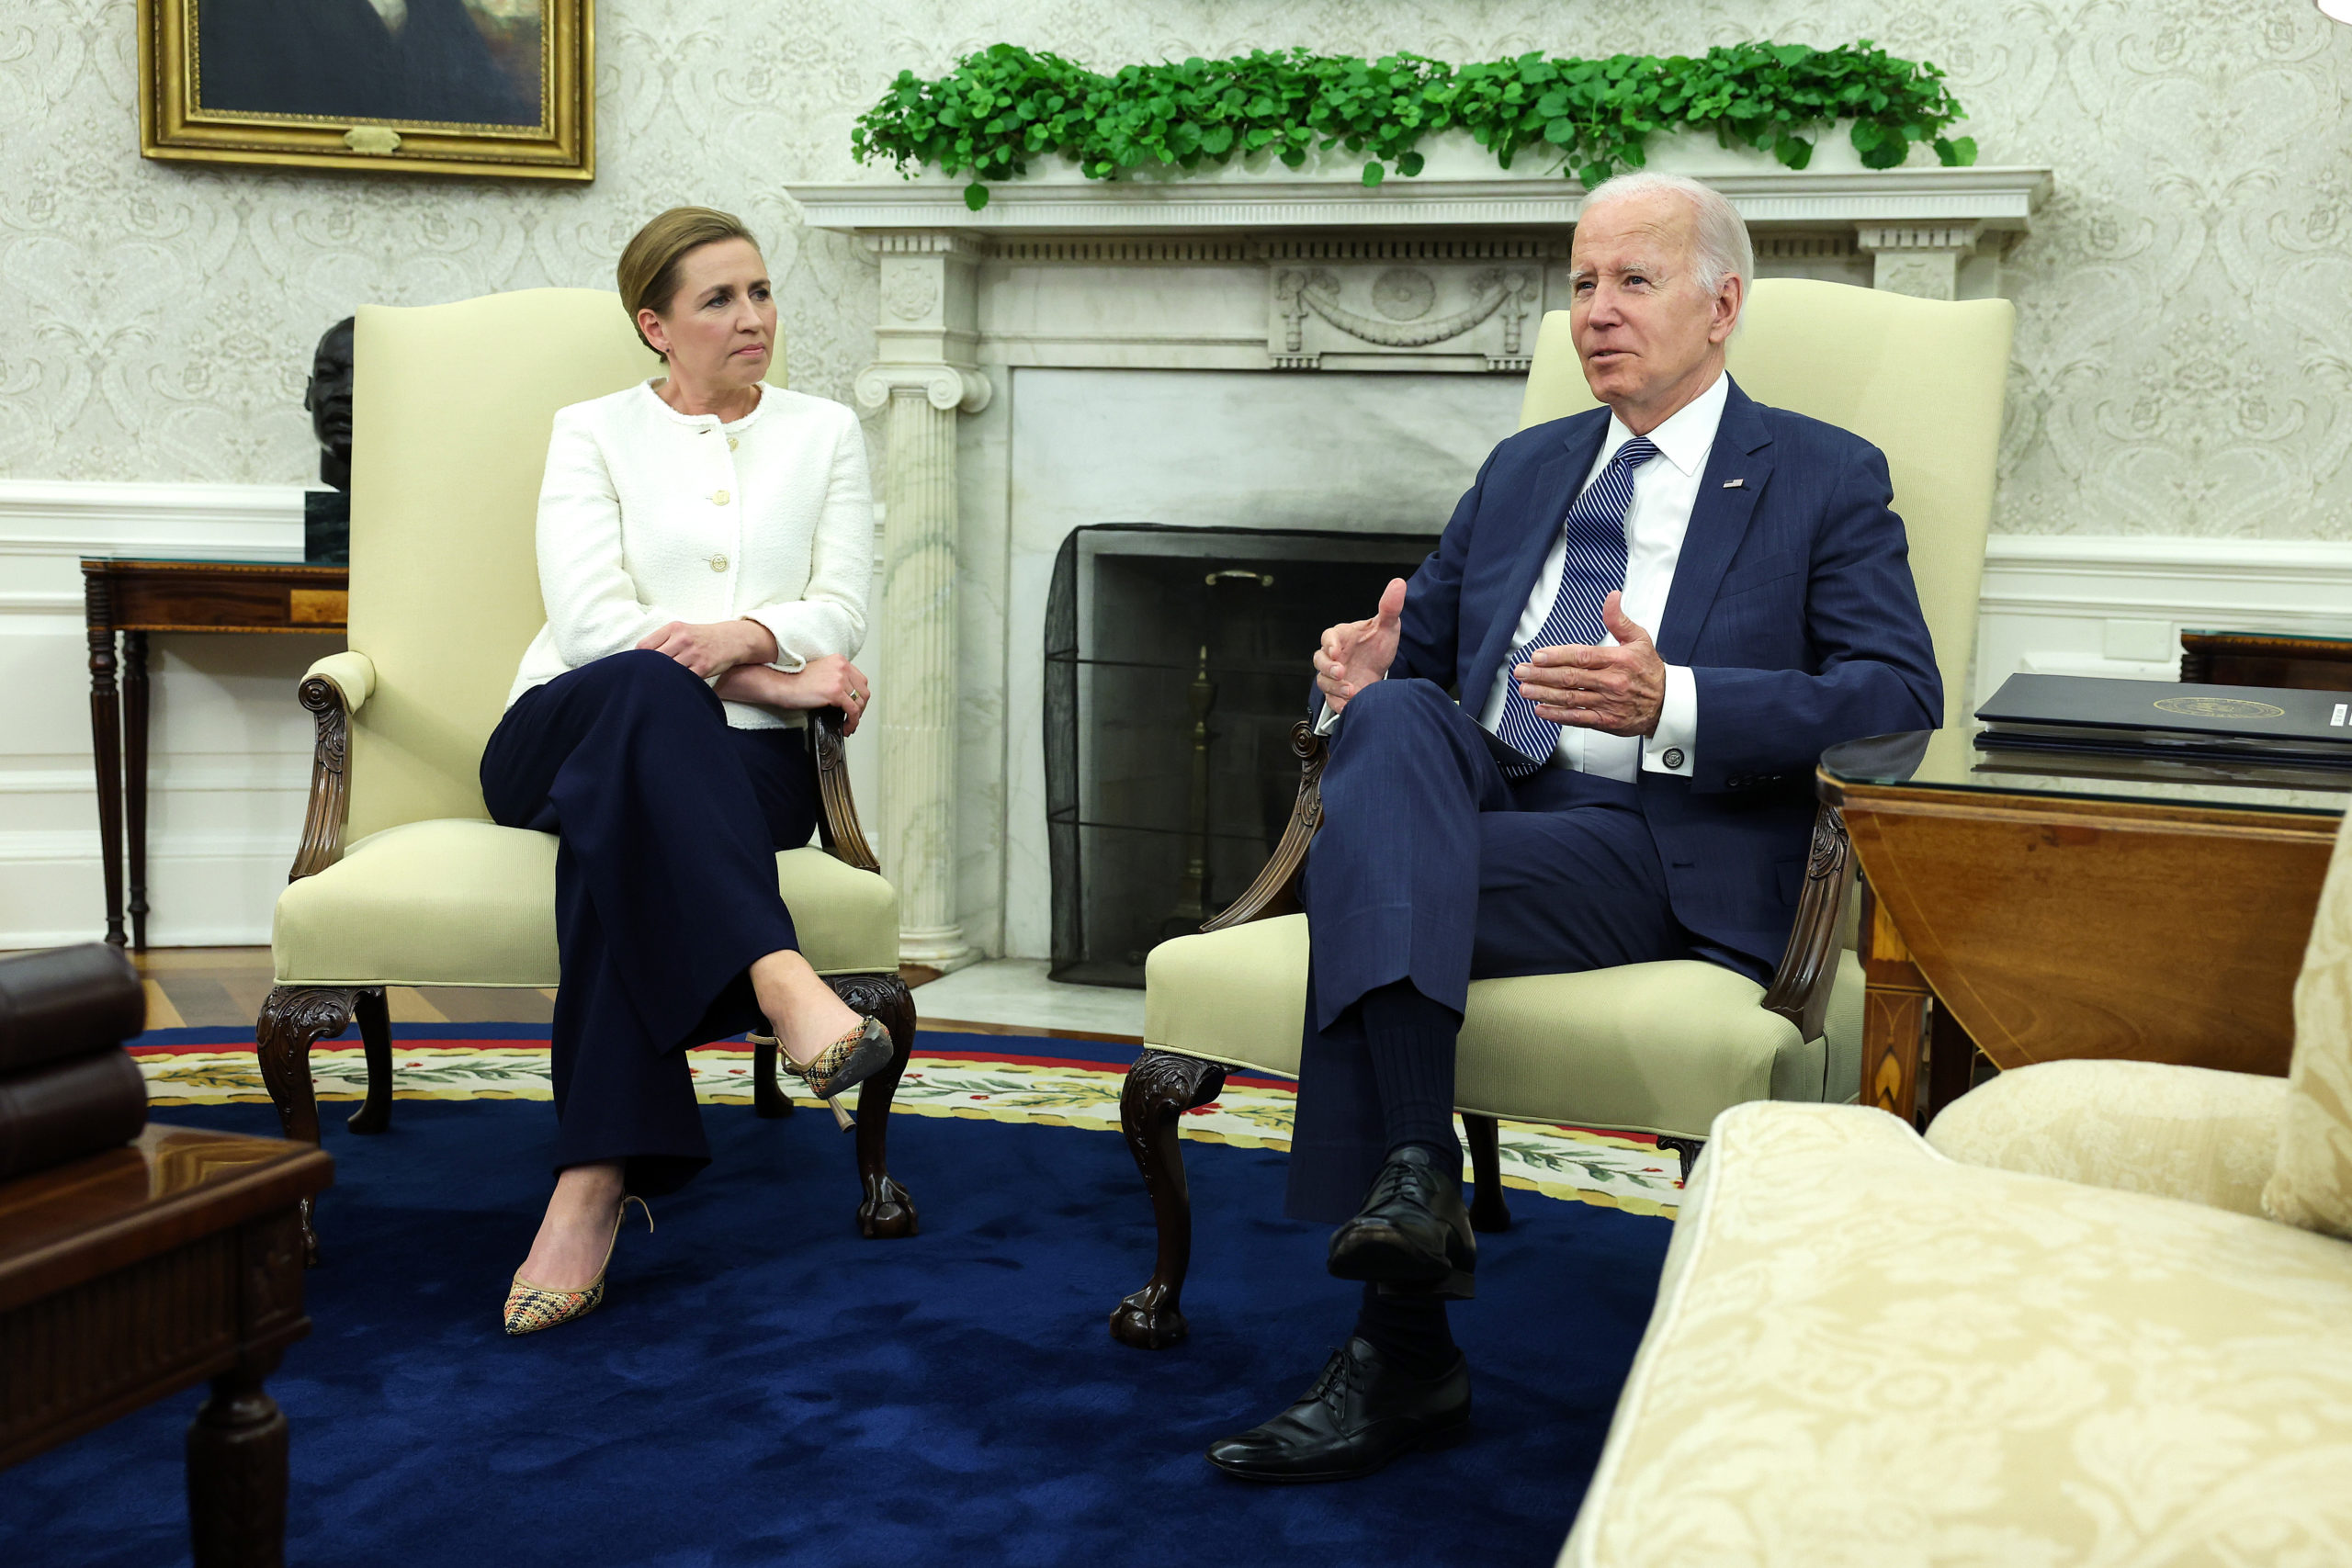 WASHINGTON, DC - JUNE 05: U.S. President Joe Biden holds a bilateral meeting with Prime Minister Mette Frederiksen of Denmark in the Oval Office at the White House on June 05, 2023 in Washington, DC. Biden and Frederiksen discussed the war in Ukraine, including the recently announced plan to train and equip the Ukrainians with F-16 fighter jets.